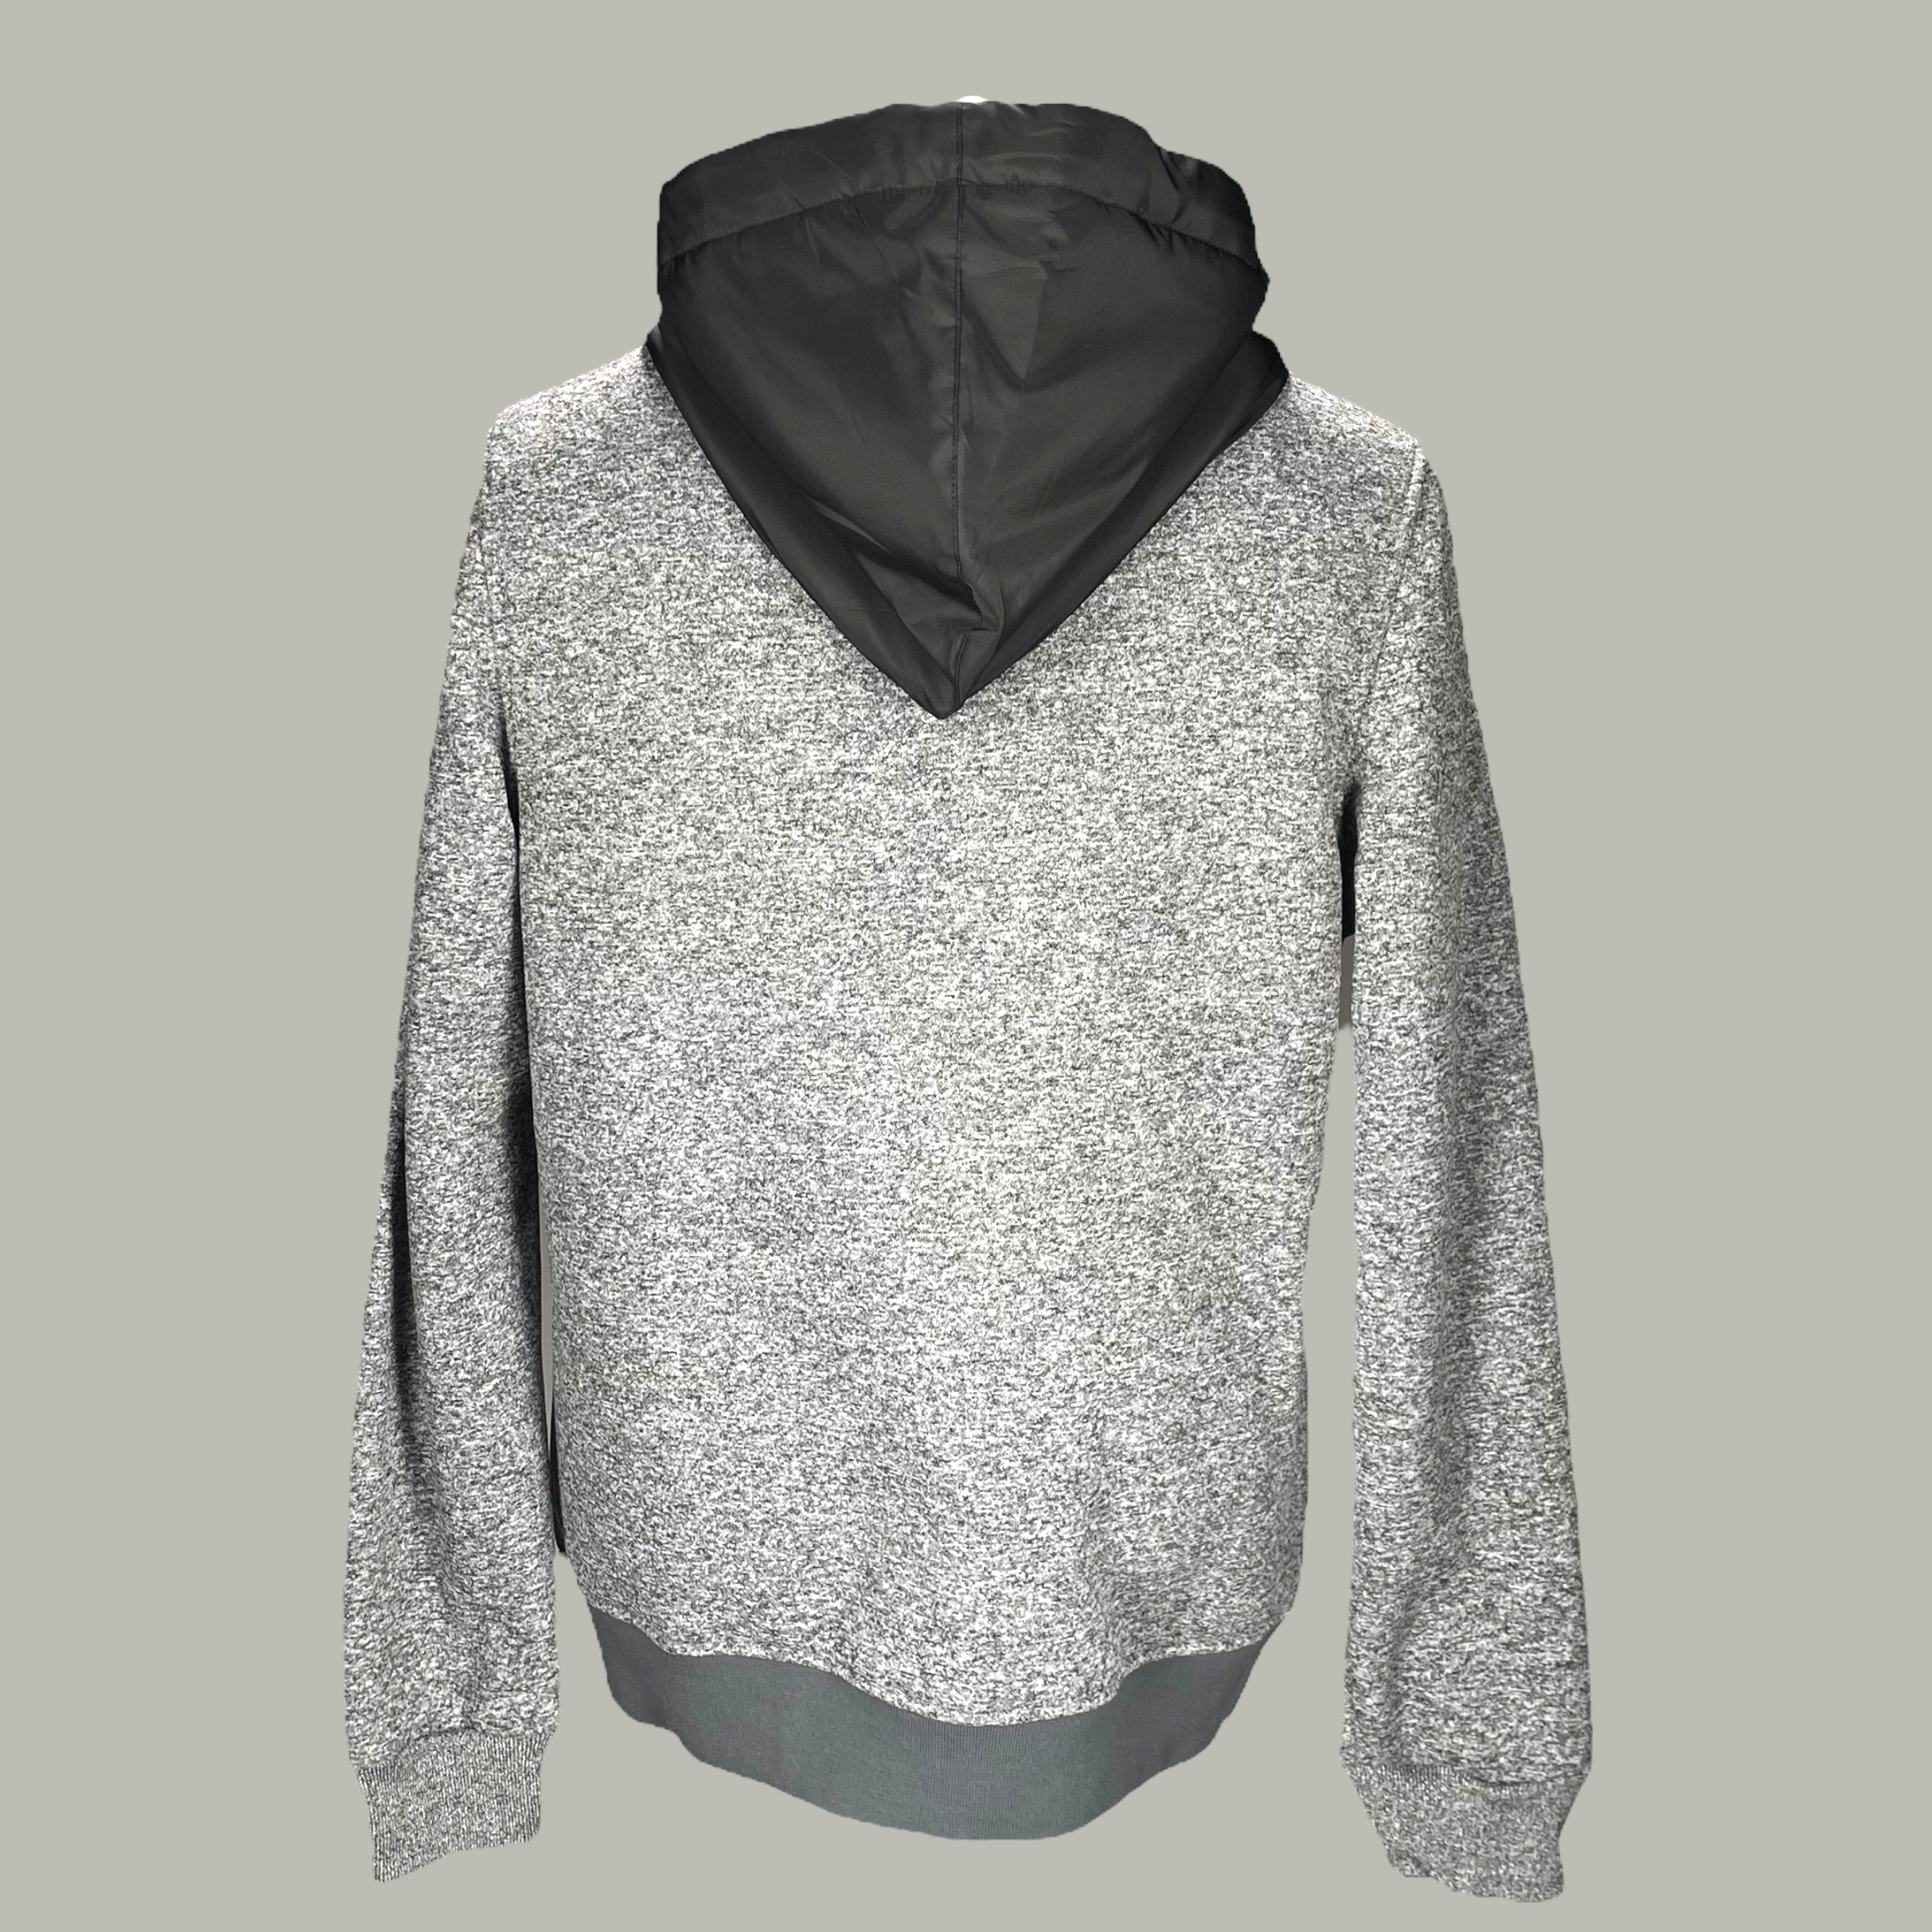 MS100-438GREY BLK HOODY WITH CORD